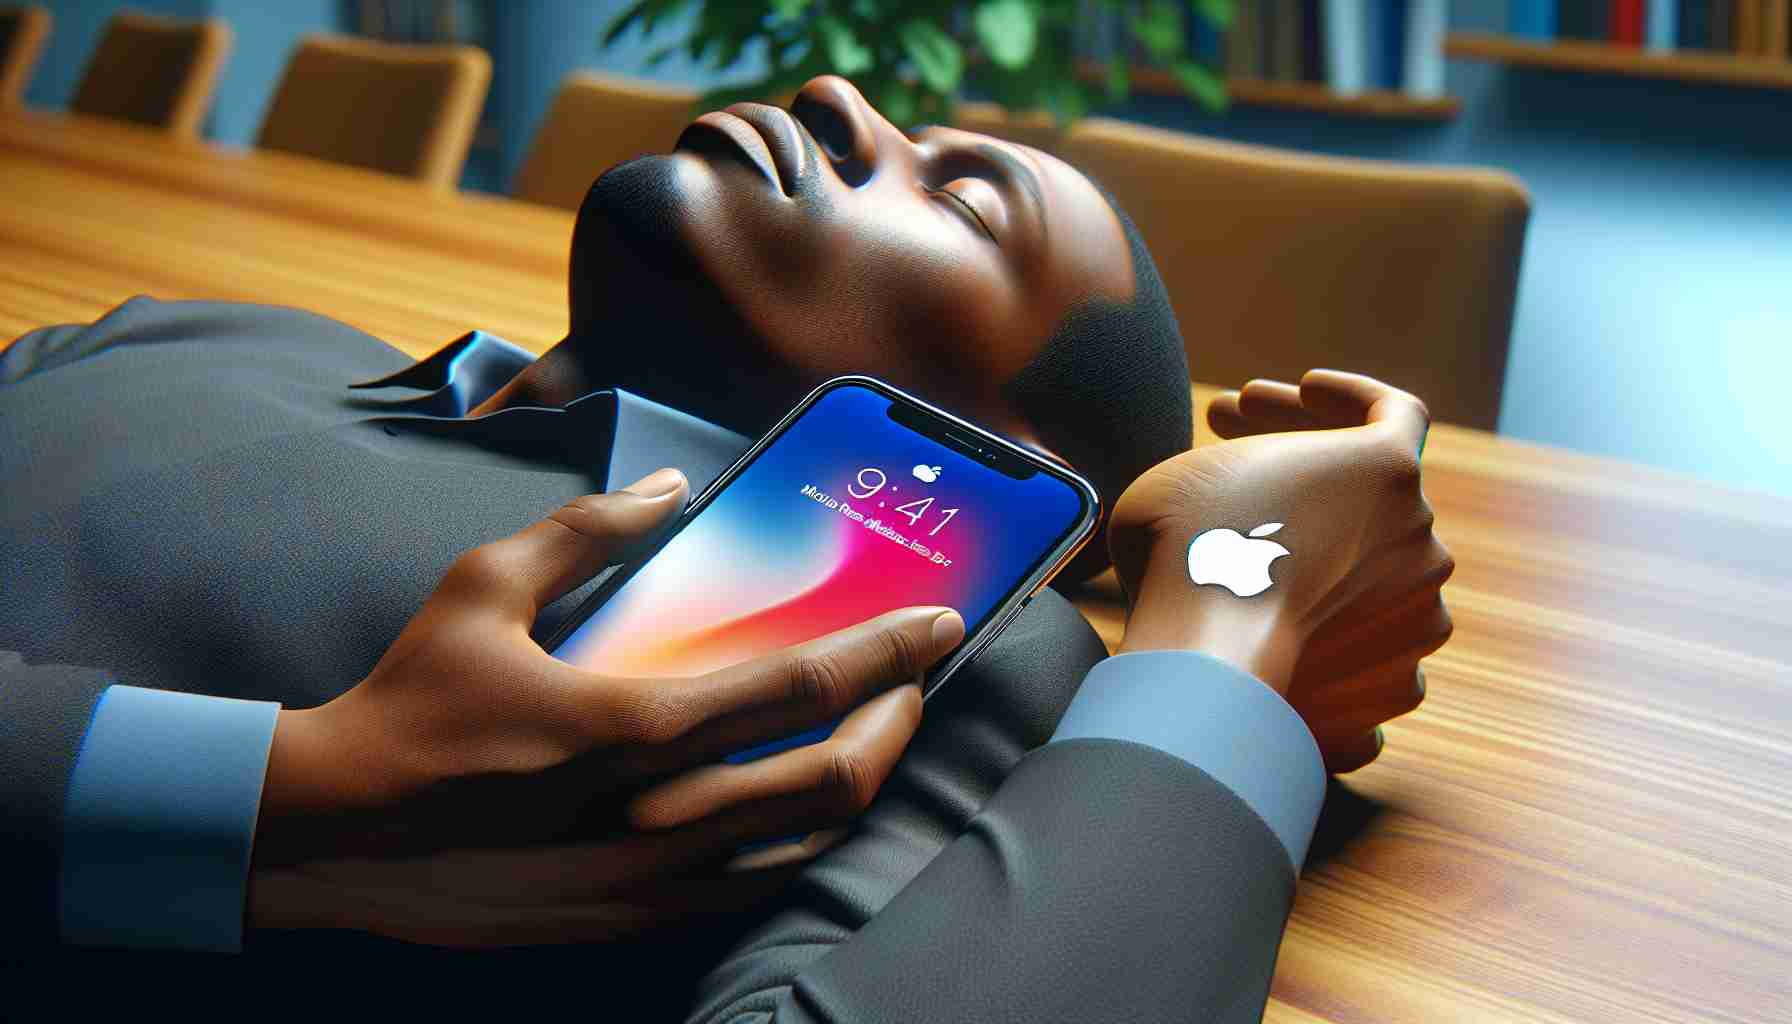 Apple Innovates with Motion Sickness Mitigation for Mobile Users